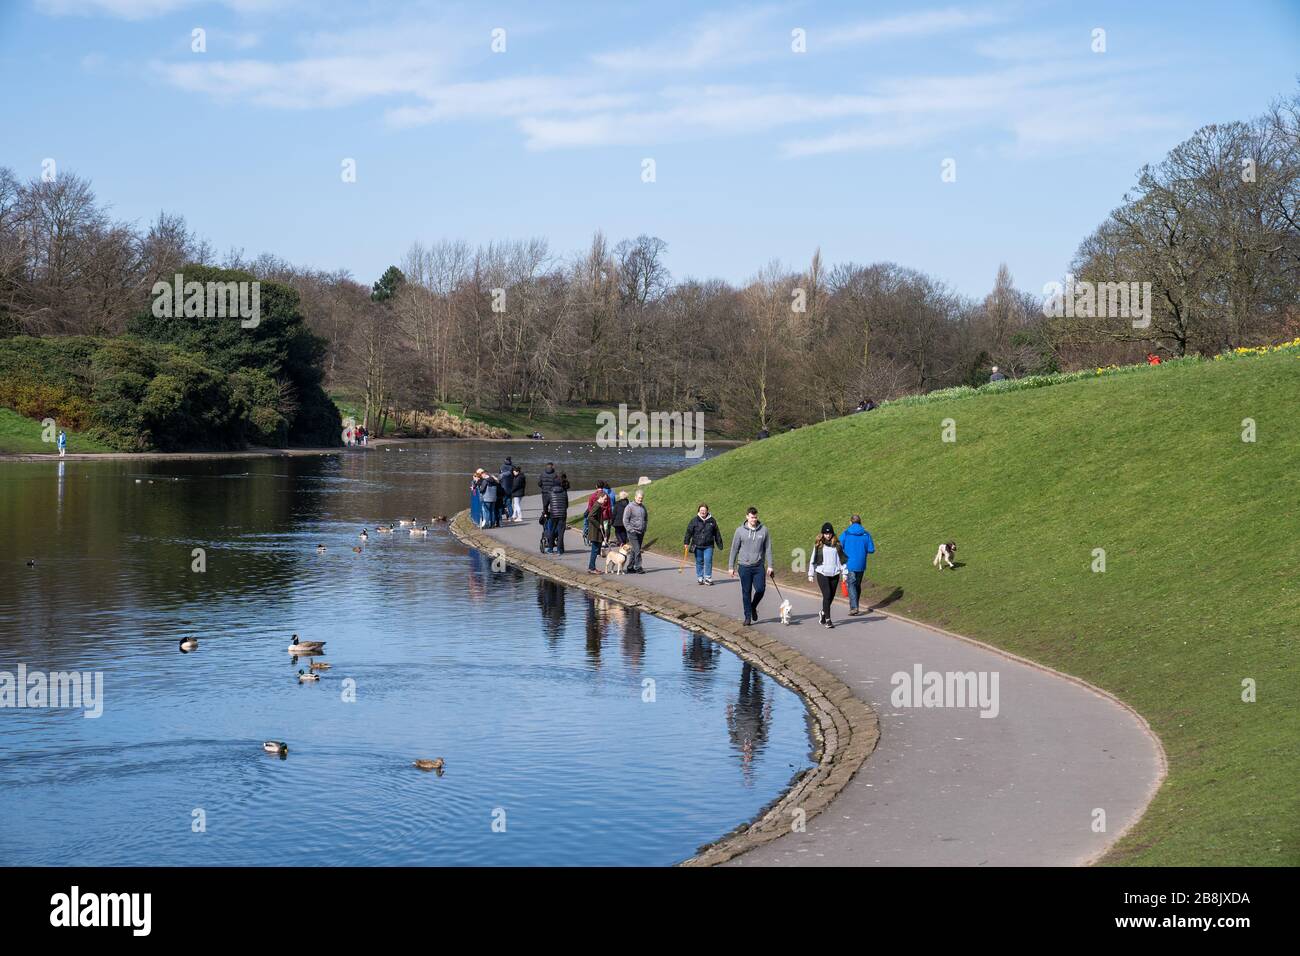 Sefton Park, Liverpool, UK. March 22, 2020. Many people out enjoying a walk in Sefton Park, Liverpool in north-west England, despite the UK government advising people to begin social distancing, and reduce social interaction, to try and reduce the transmission of Coronavirus. Credit: Christopher Middleton/Alamy Live News Stock Photo